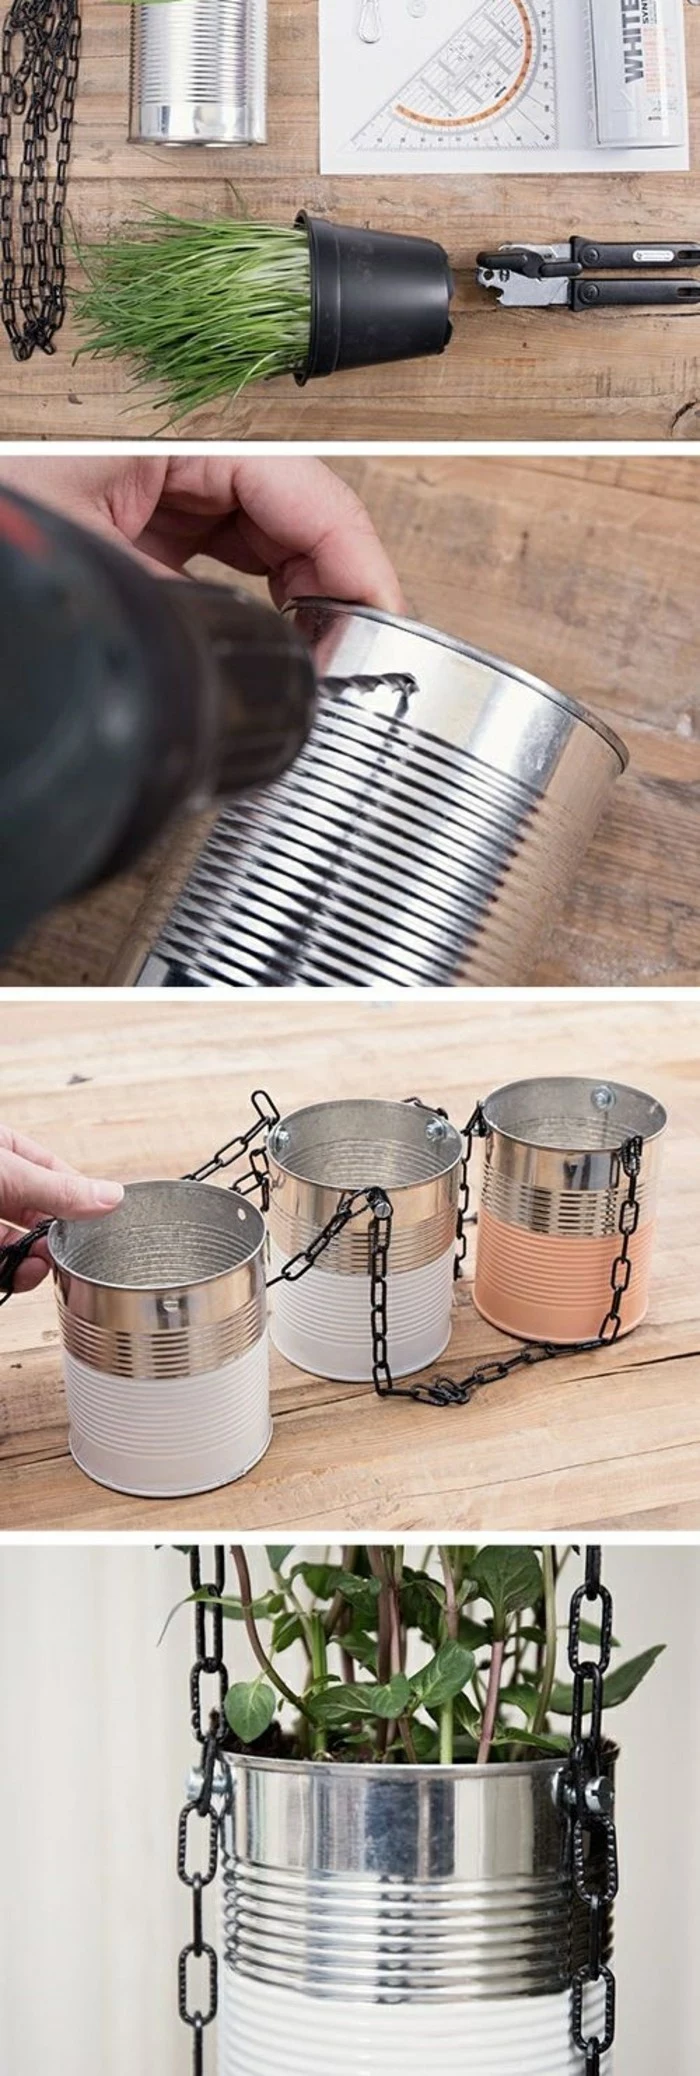 tin can crafts, aluminium can and green potted plant, black chain and ruler, near metal pliers, person making holes in can with drill, attaching three cans together with chain, close up of a can with plant inside